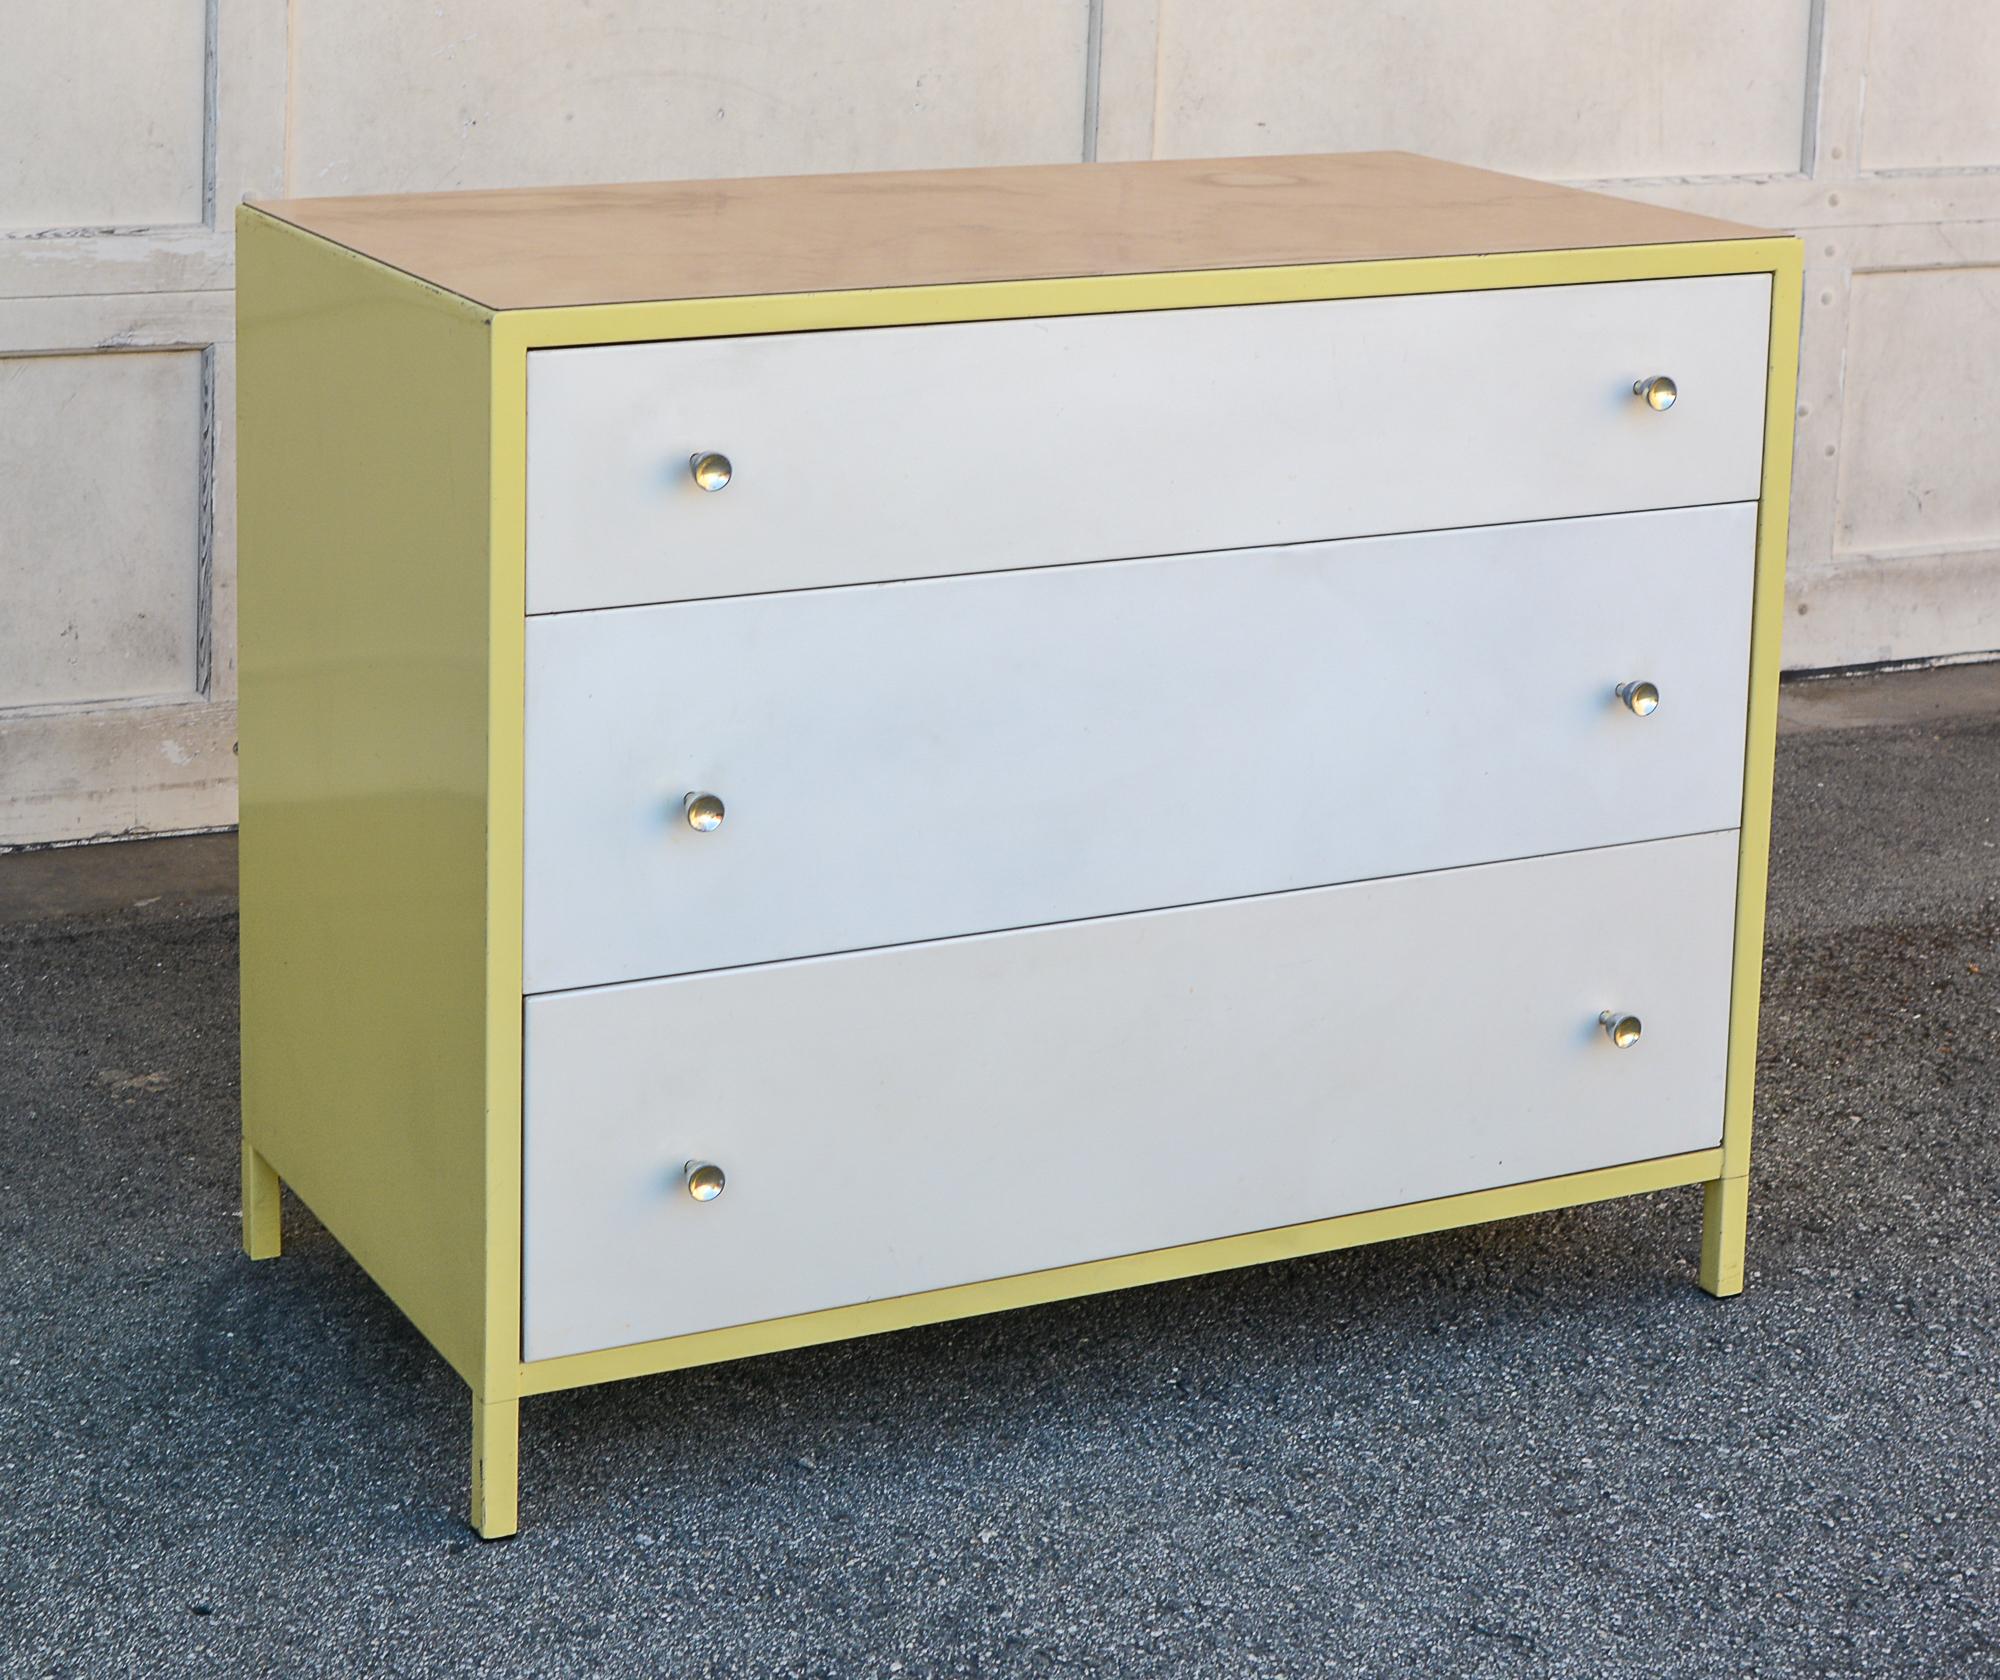 Steel dresser by Simmons Company from the Theme line. The dresser has a yellow case with white drawers. The top is a wood grain plastic laminate. There are some scratches and small paint losses. One drawer is a slightly different white than the